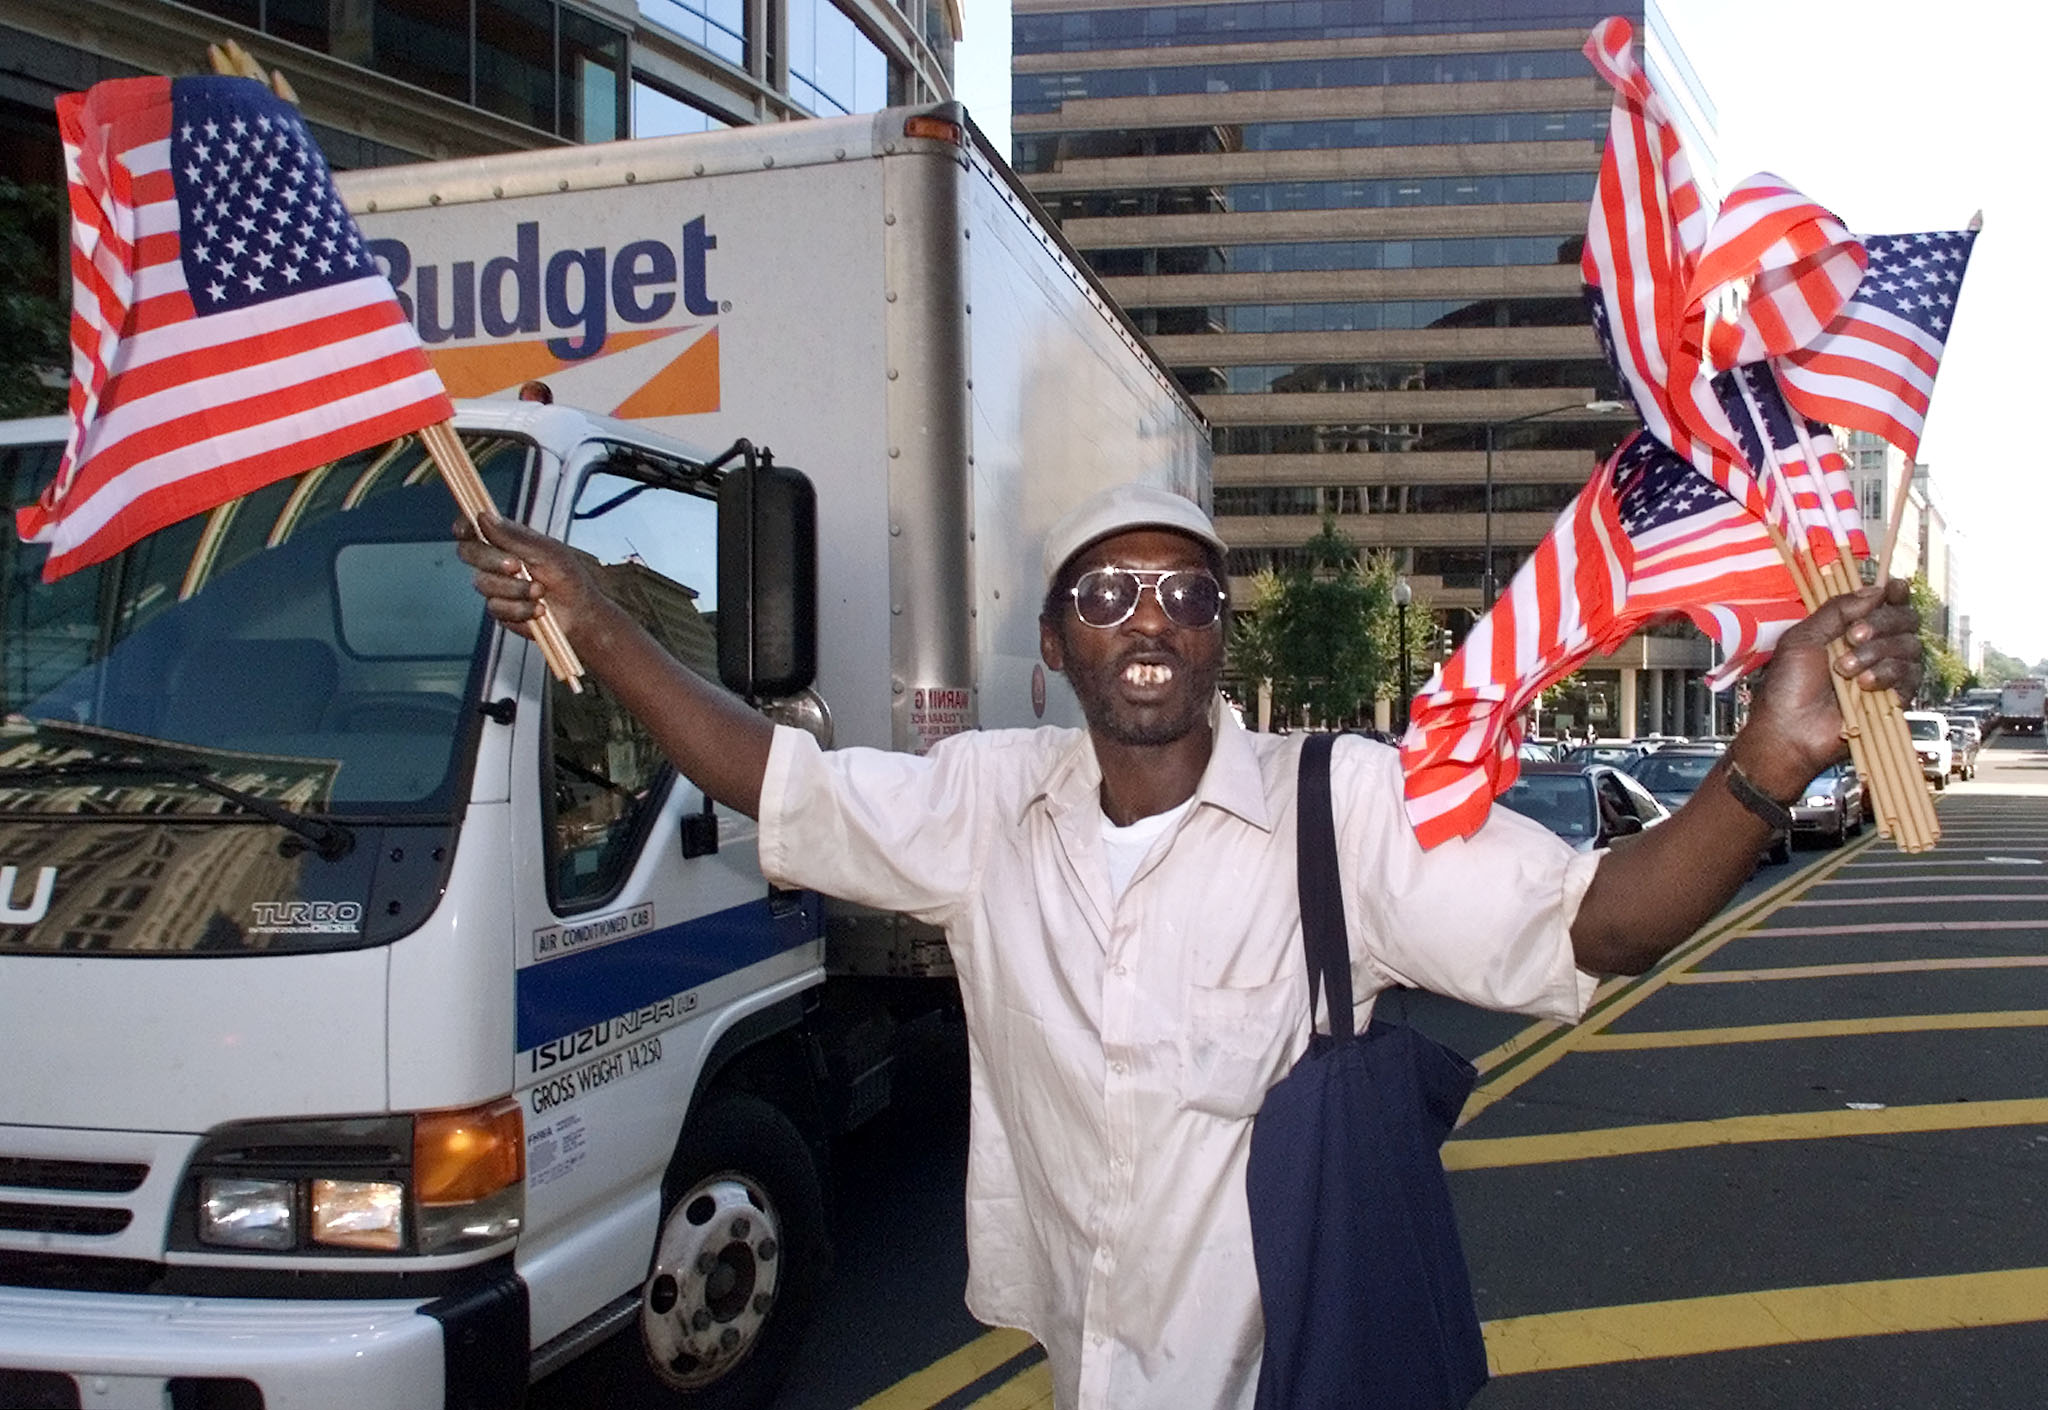 Jeremy Hodgkins hands out American flags to drivers in Washington D.C. September 13, 2001. Immediately after the attack flag sales soared in the United States -- with many stores emptying their inventory. (Photo: REUTERS/Win McNamee/Newscom)